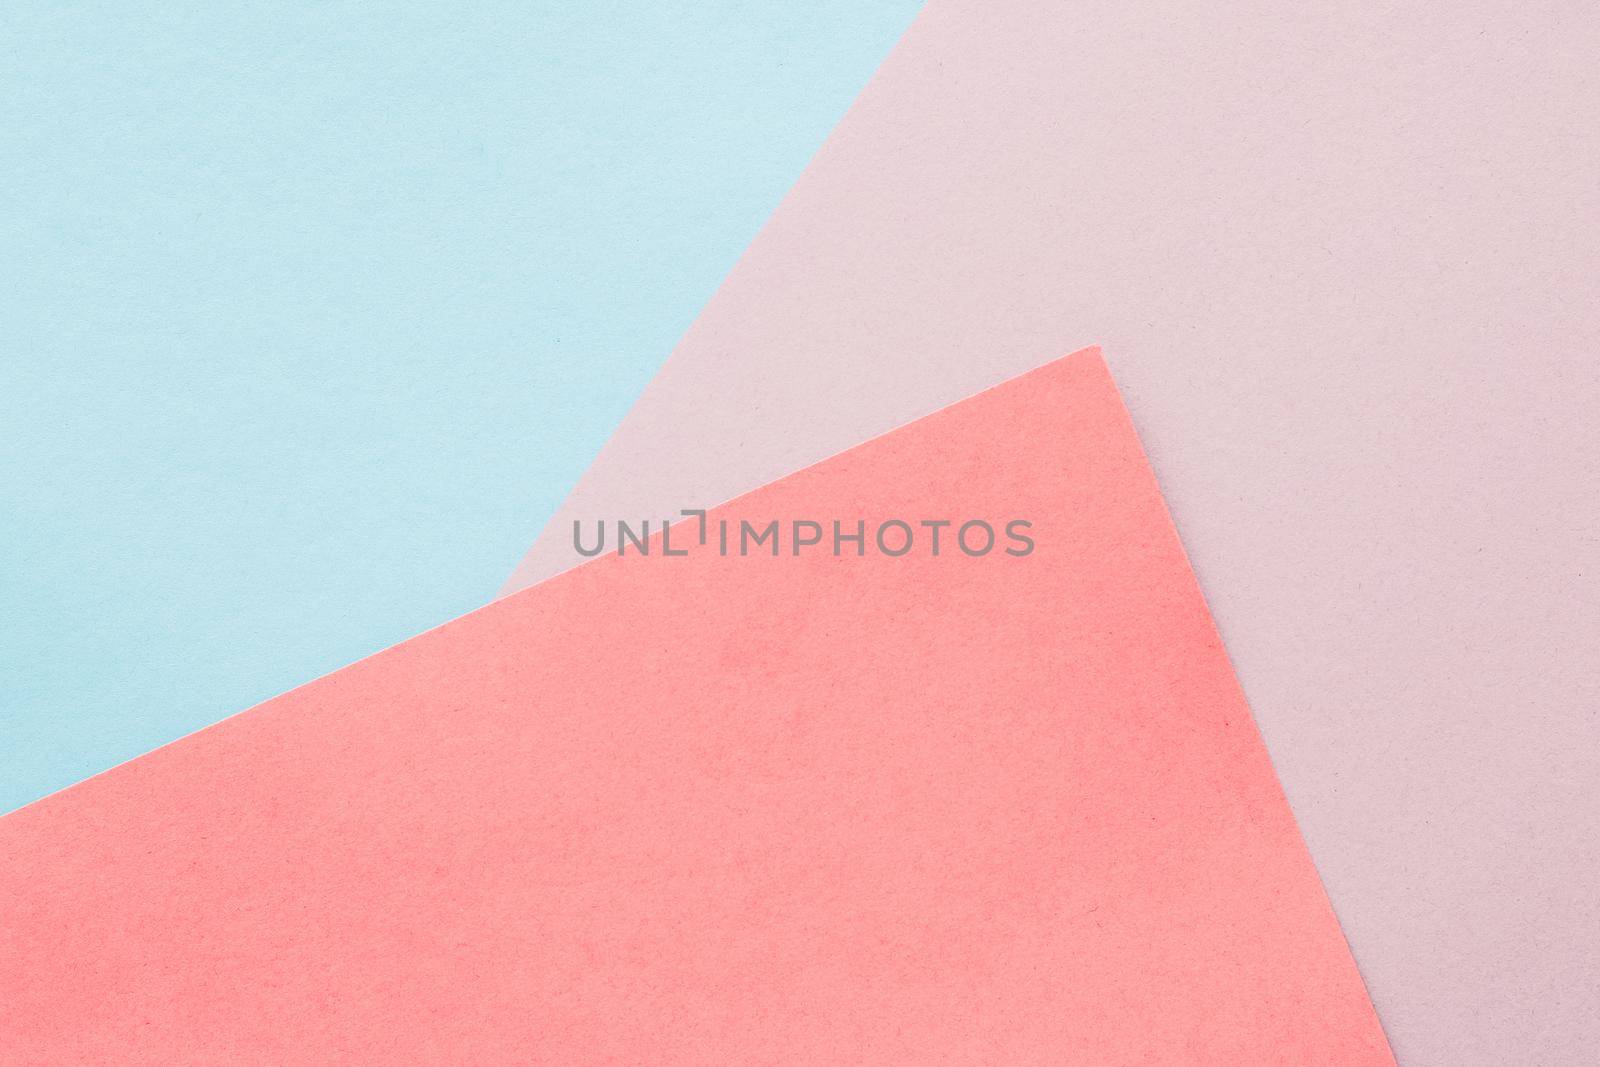 Blank paper textured background, stationery mockup by Anneleven